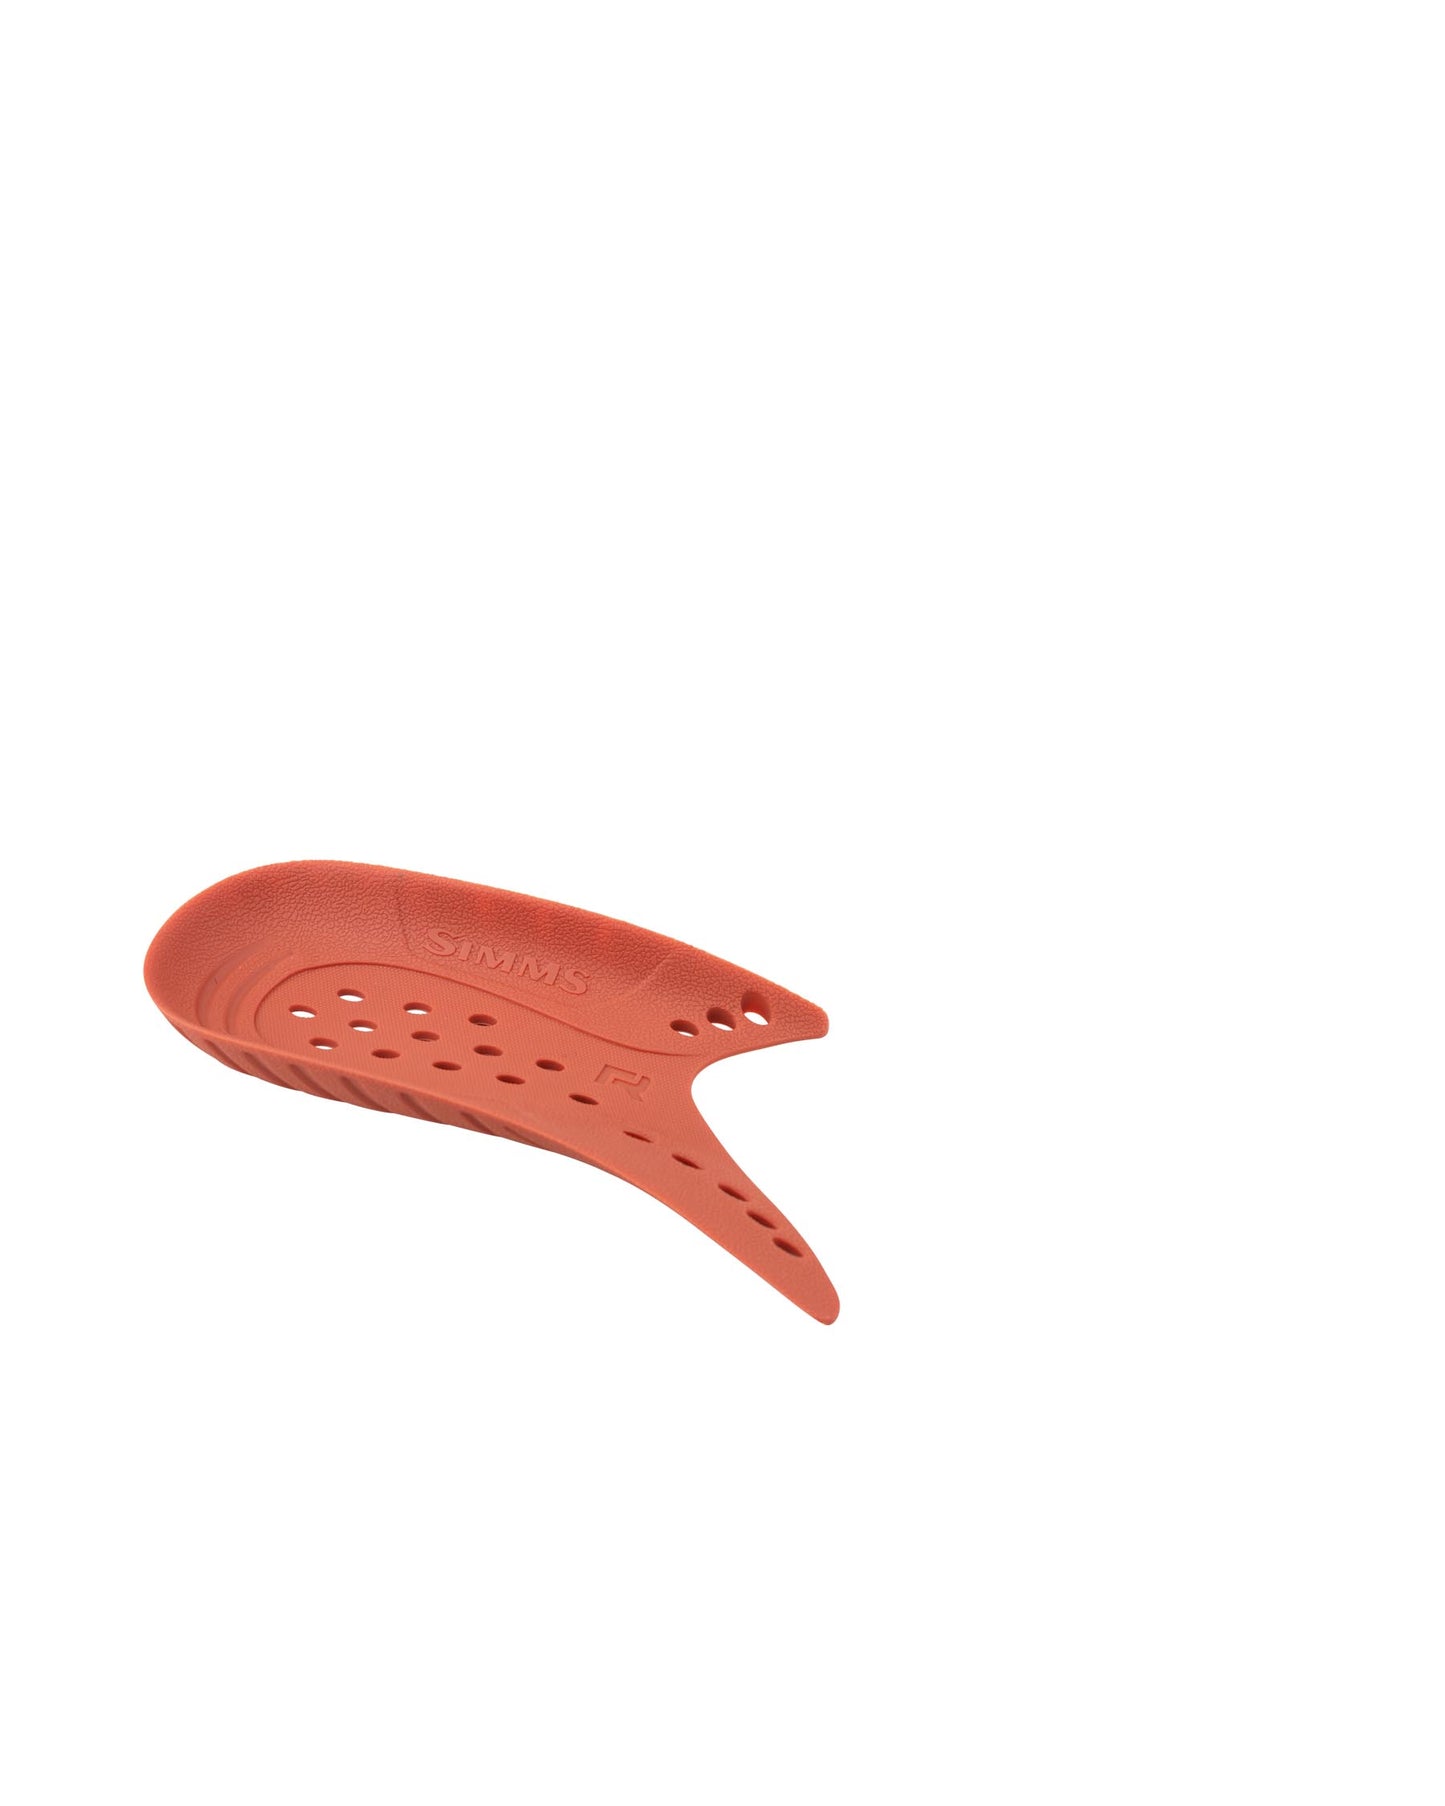 Right Angle Wading Boot Insert - Simms Orange